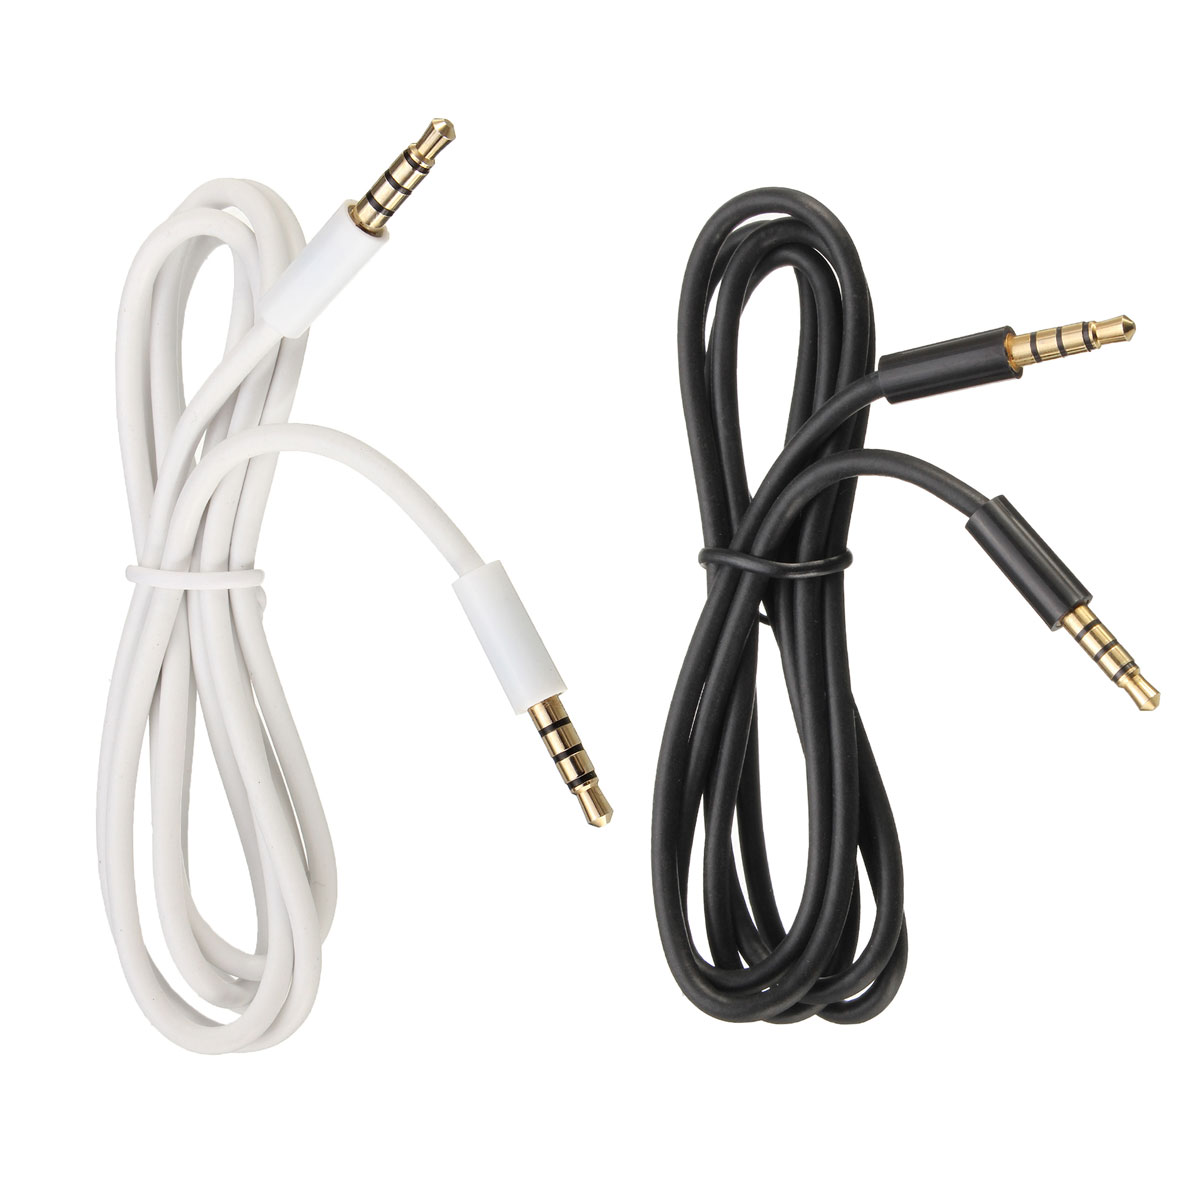 35mm-Head-Phone-Male-to-Male-Aux-Cord-Stereo-Audio-Cable-1164540-1